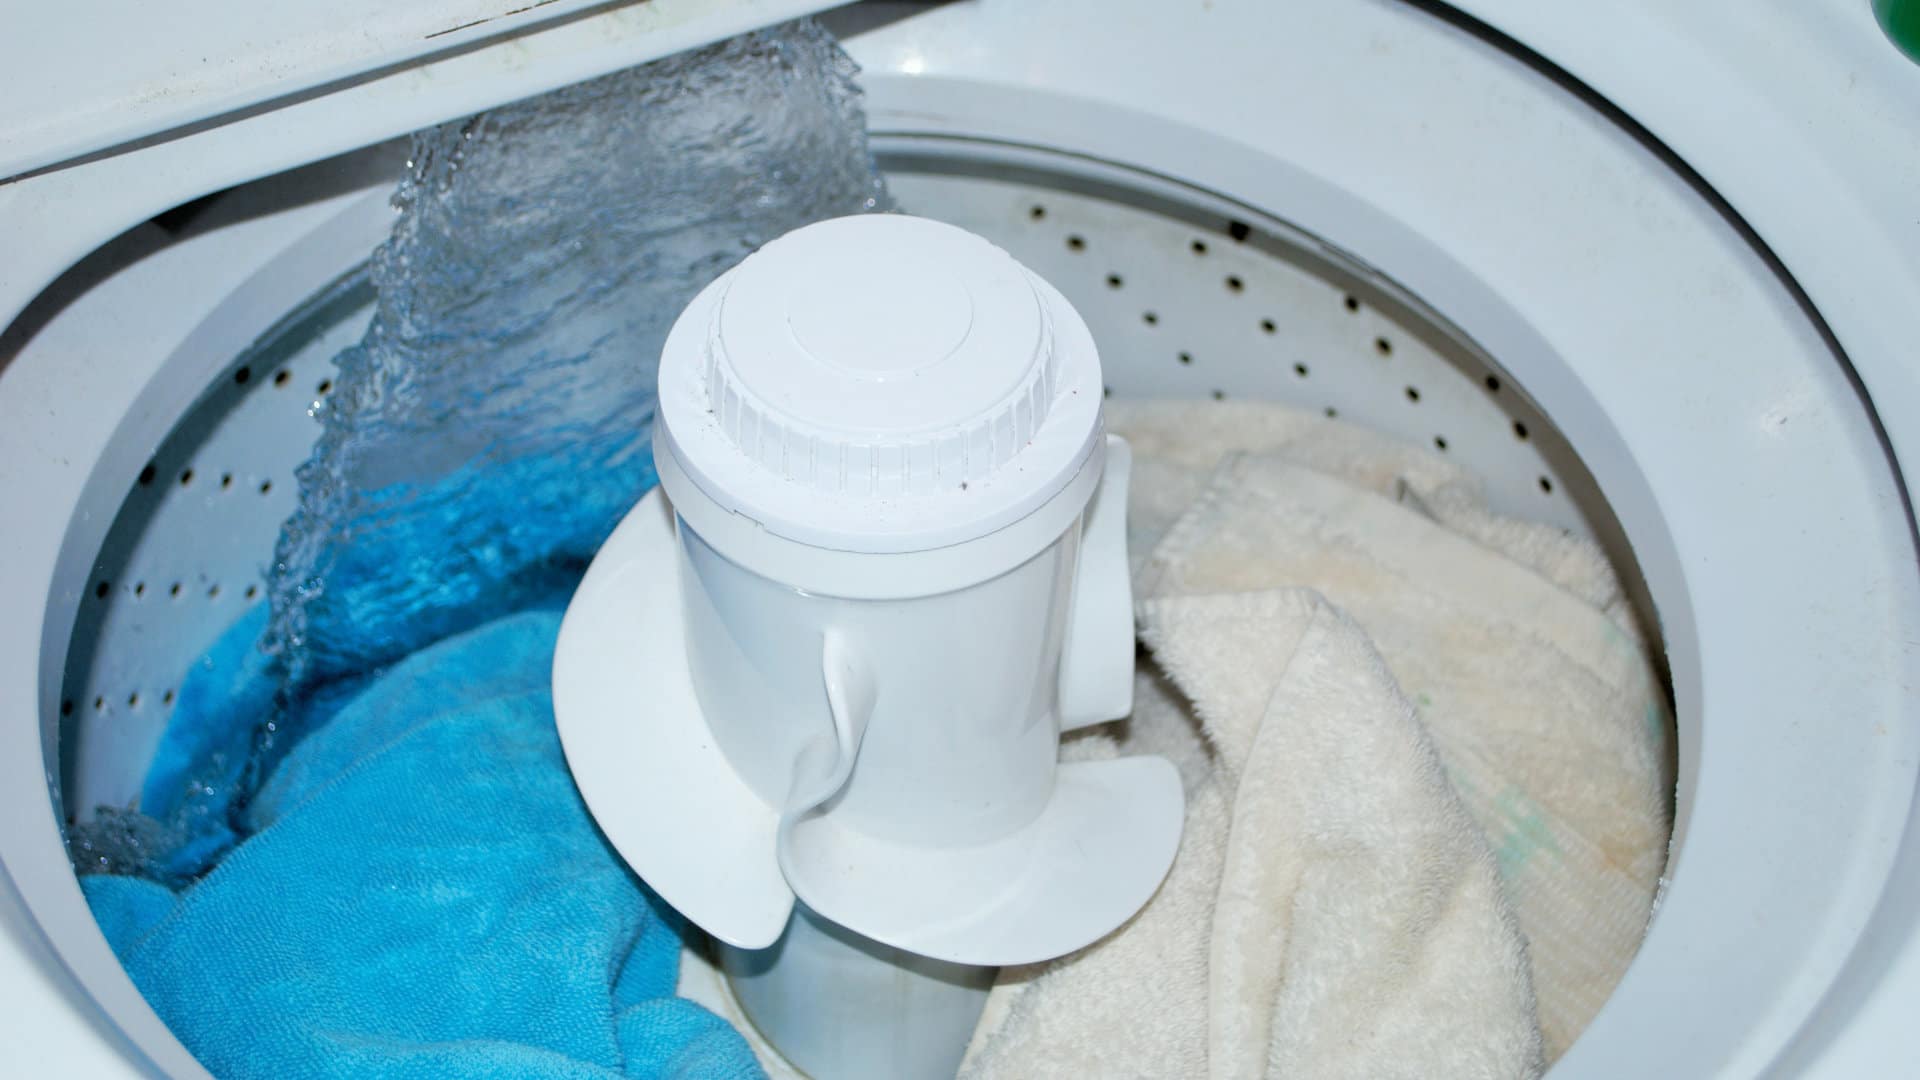 Featured image for “Amana Washer Not Spinning? Here’s What to Do”